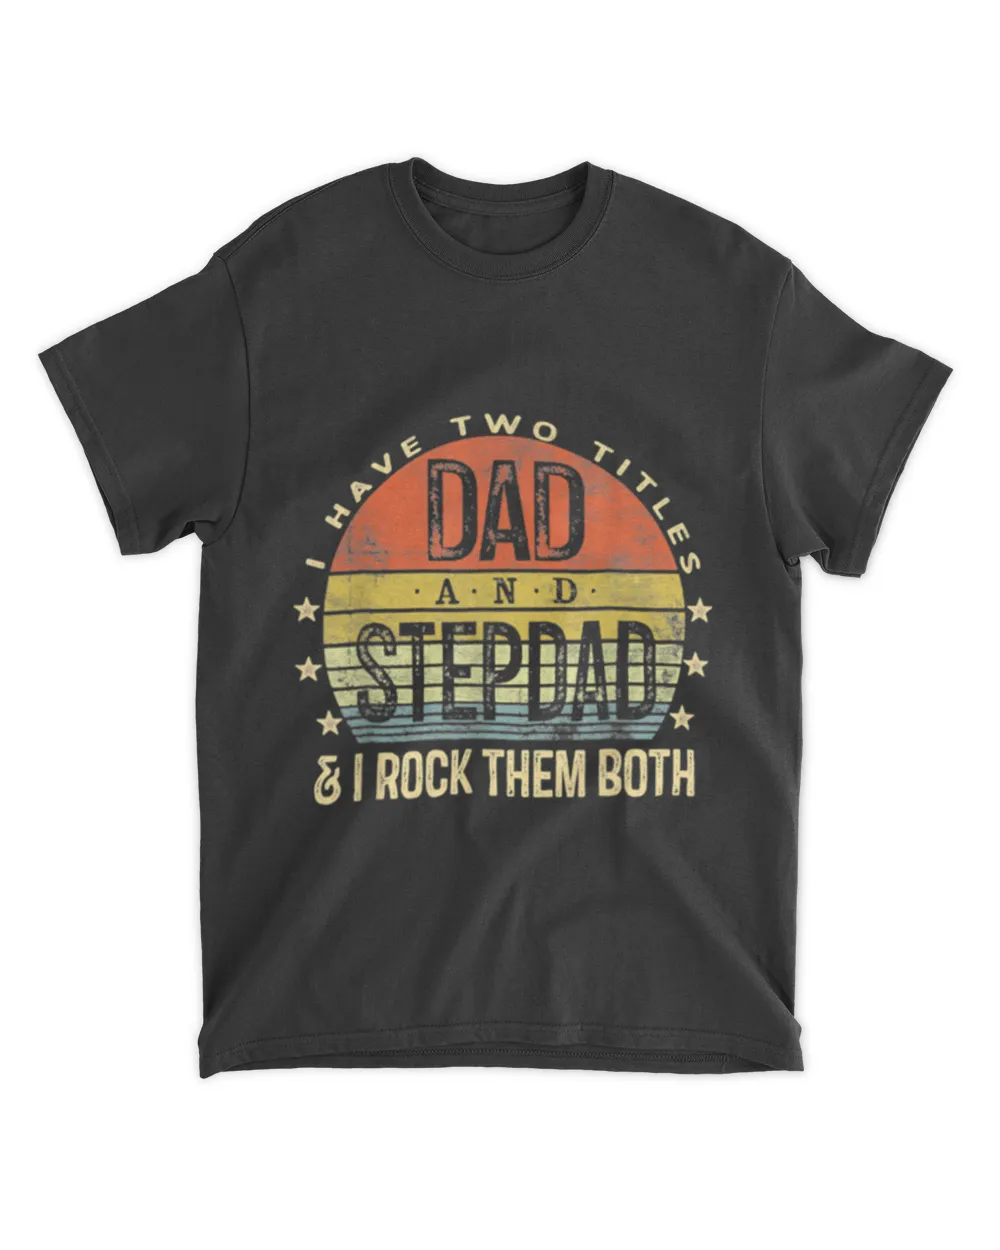 I Have Two Titles Dad And Stepdad Rock Them Both Boy Girl T-Shirt tee